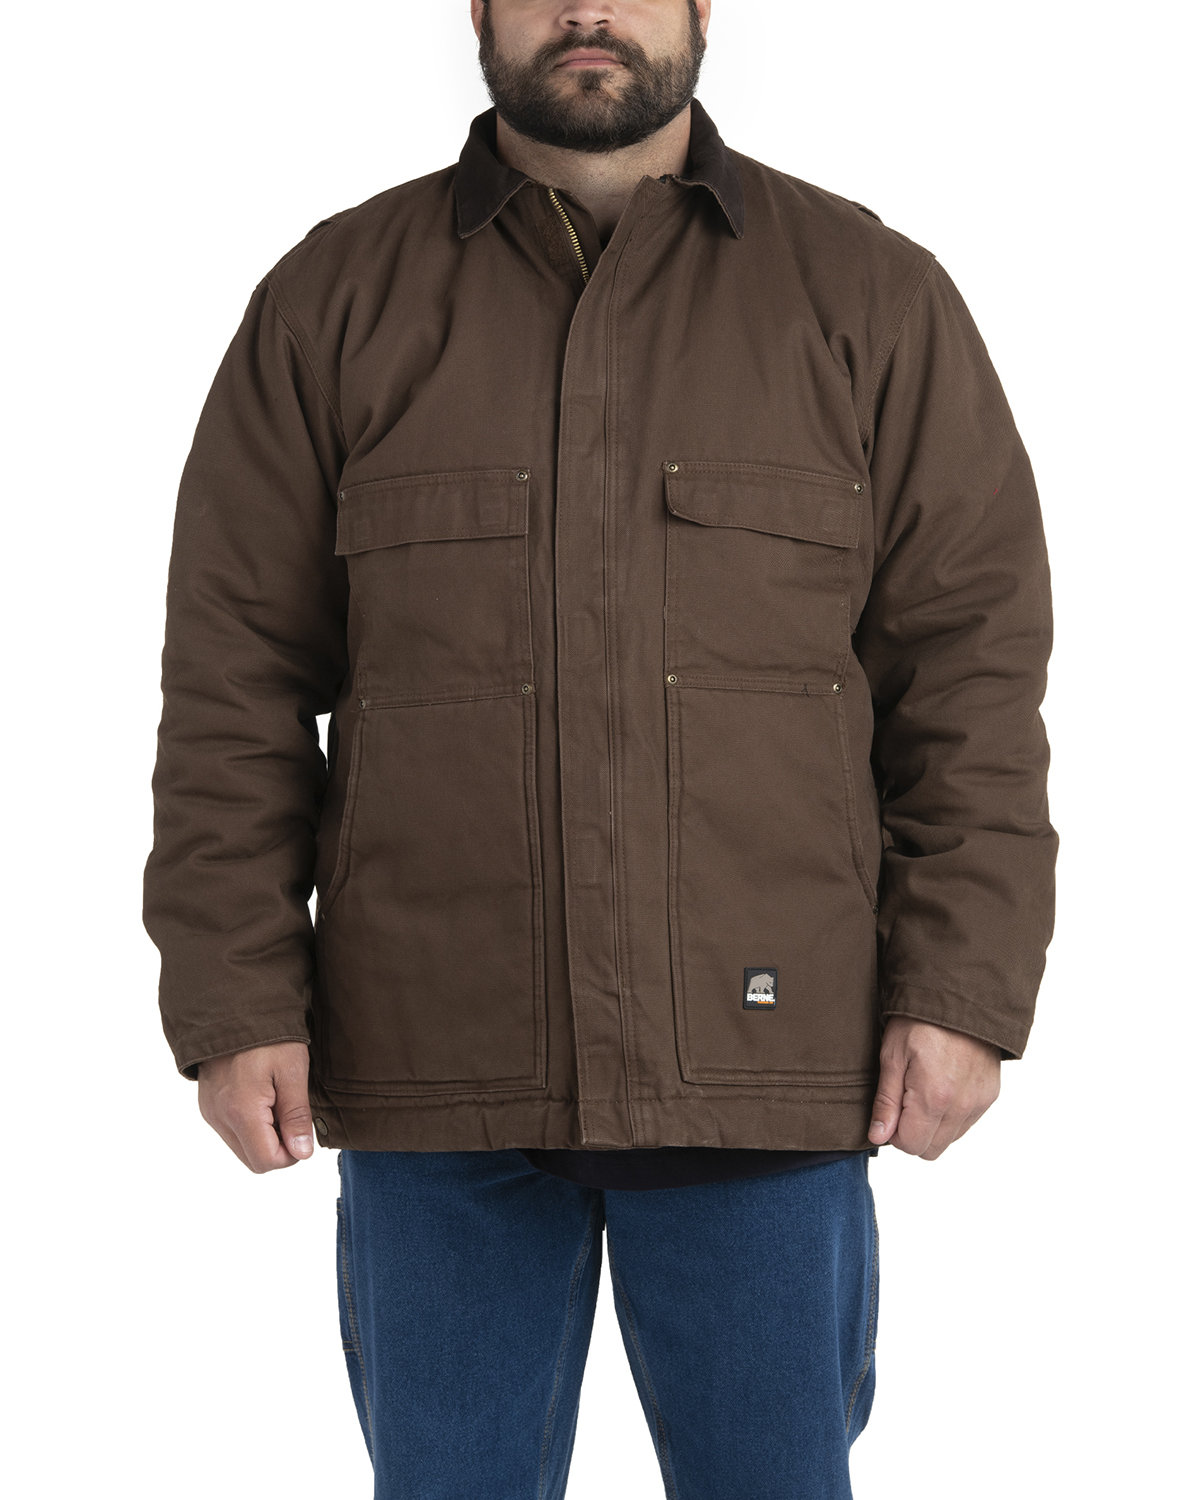 Buy Mens Tall Highland Washed Chore Coat - Berne Online at Best price - TN